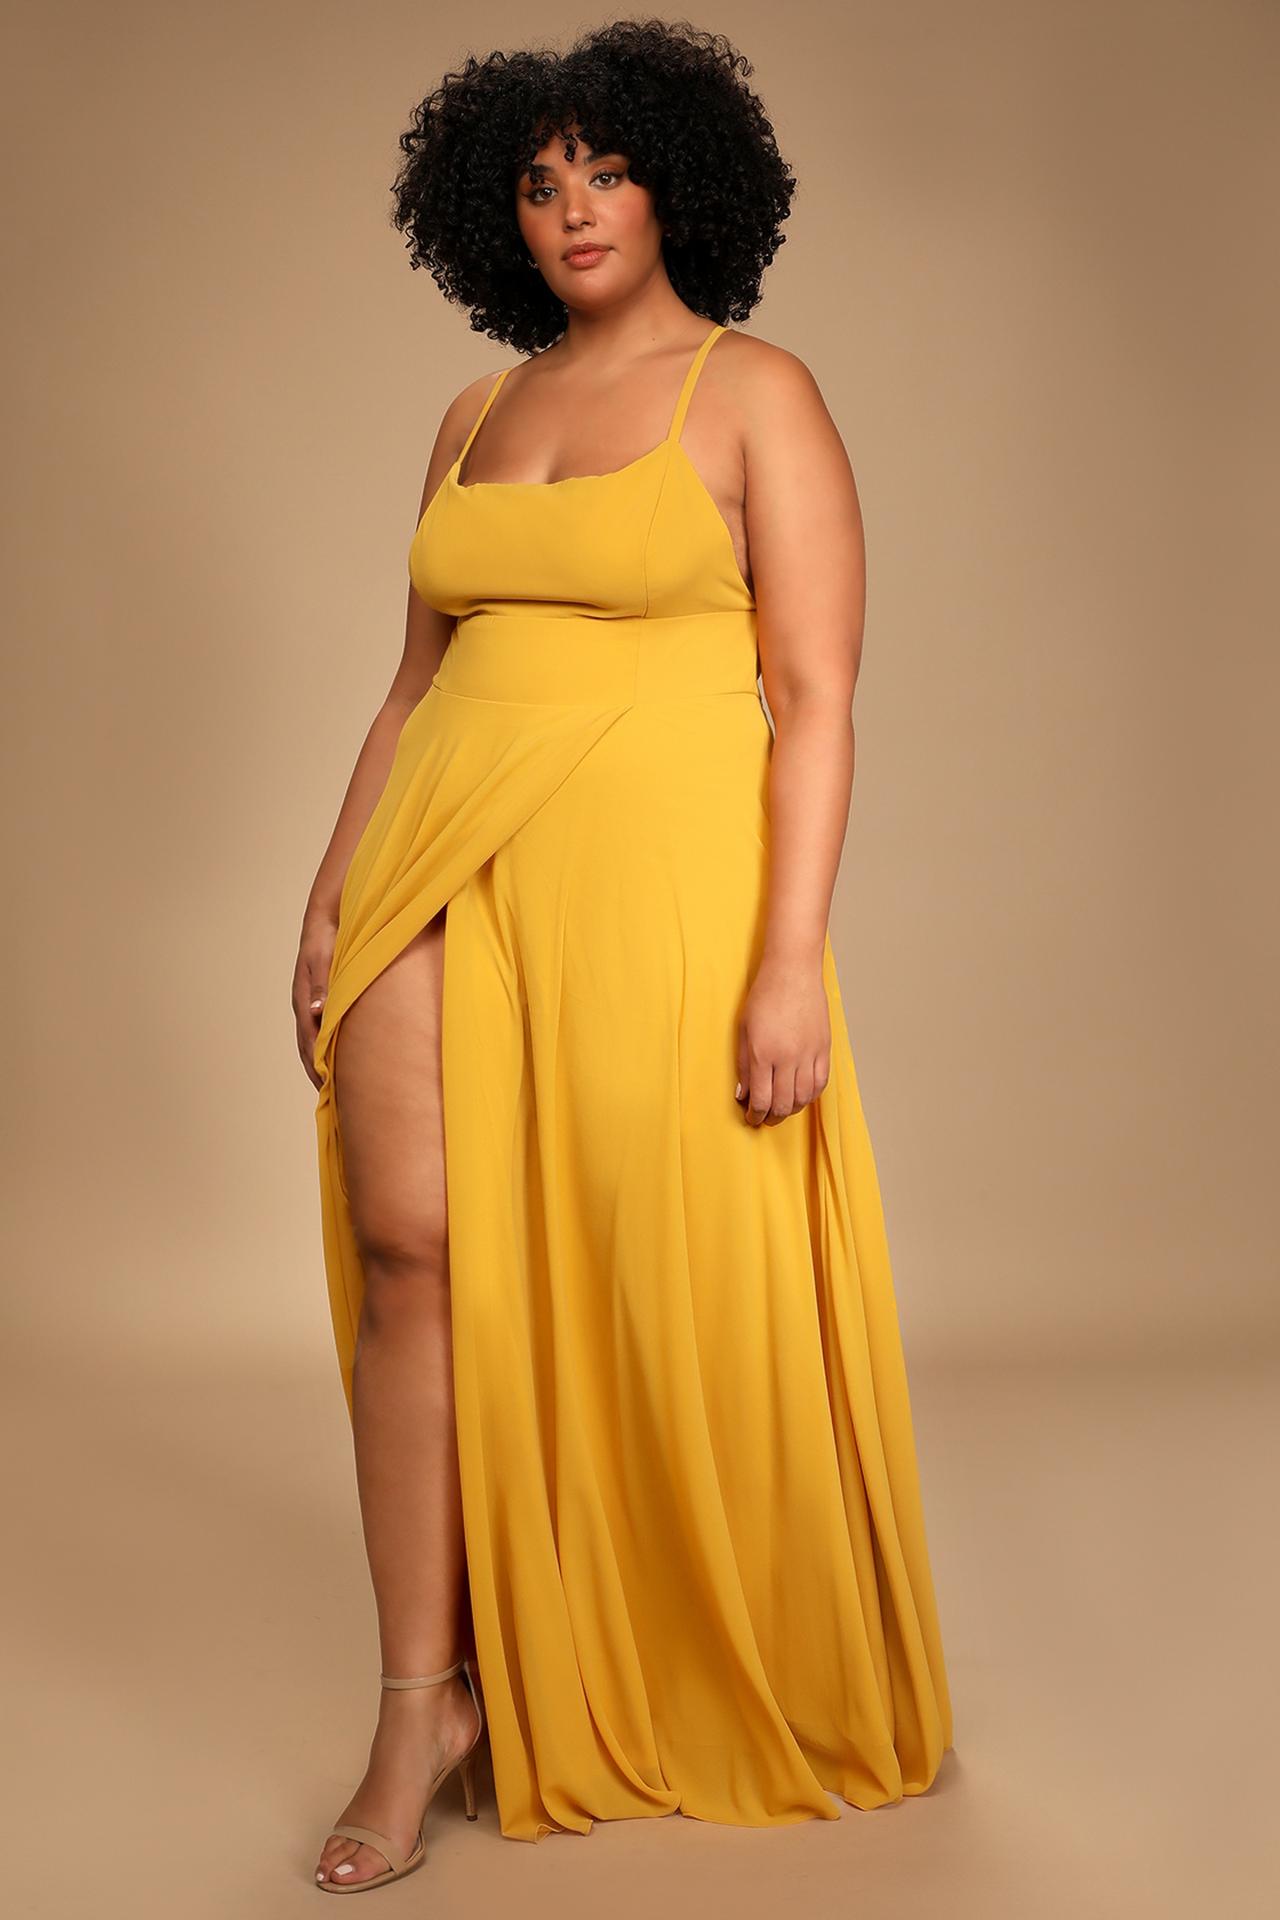 43 Plus Size Wedding Guest Dresses {with Sleeves}